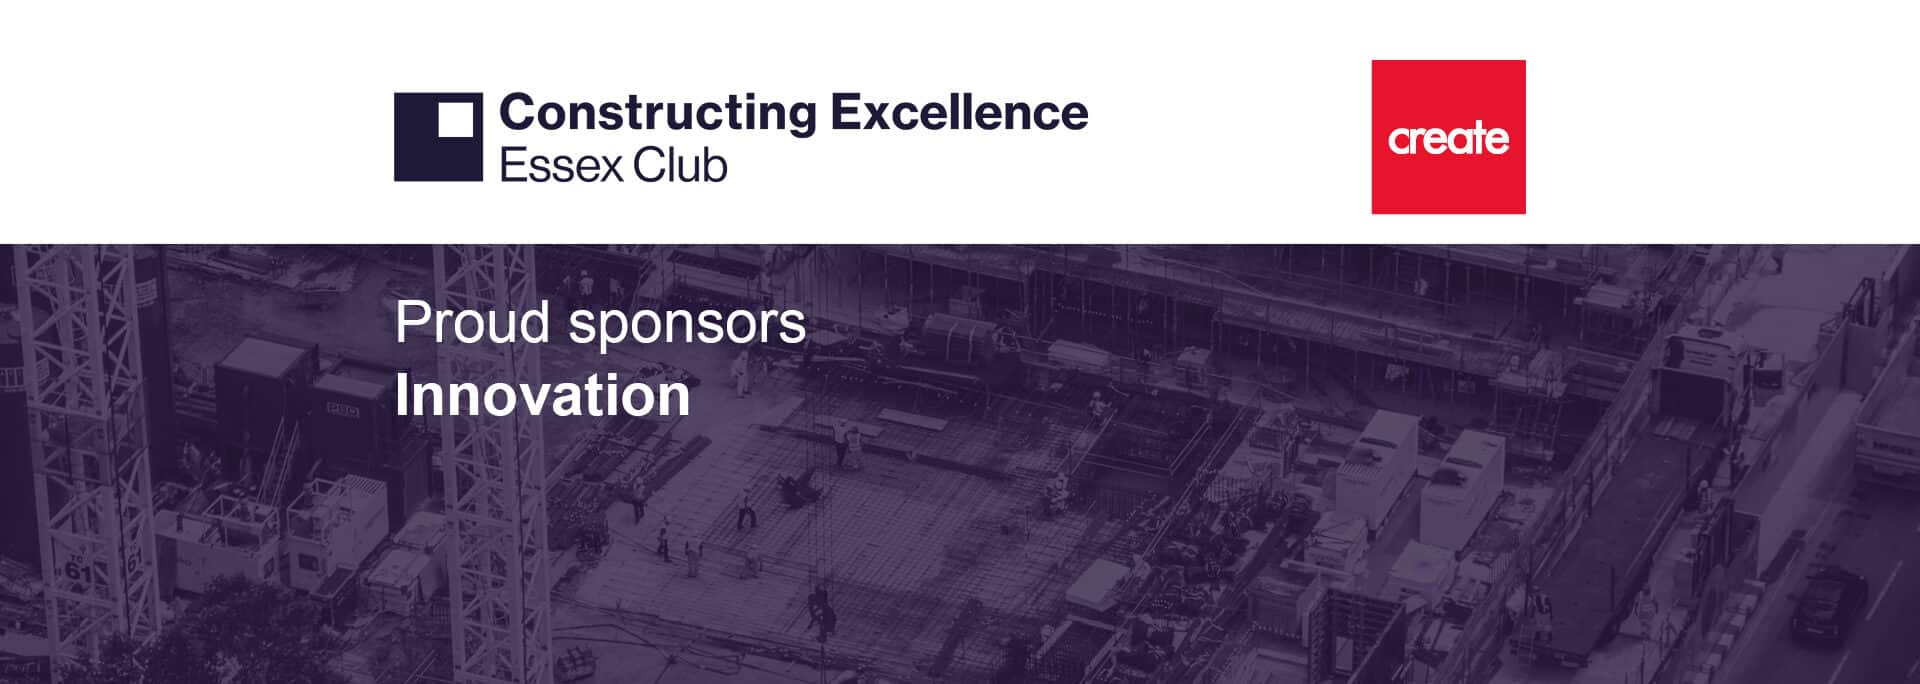 Constructing Excellence Essex Club awards